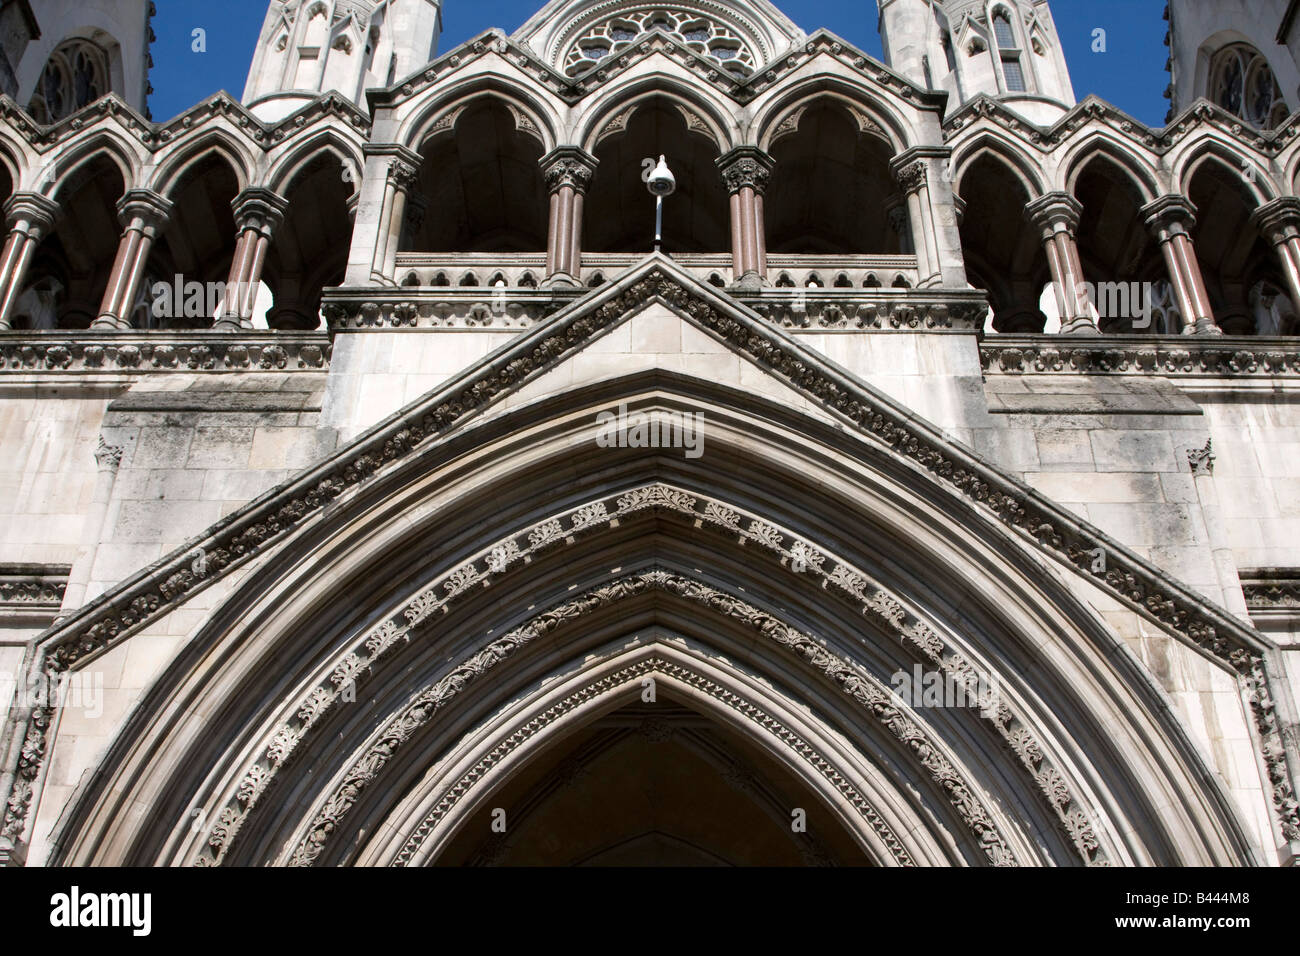 The Royal Courts of Justice, commonly called the Law Courts city of london england uk gb Stock Photo